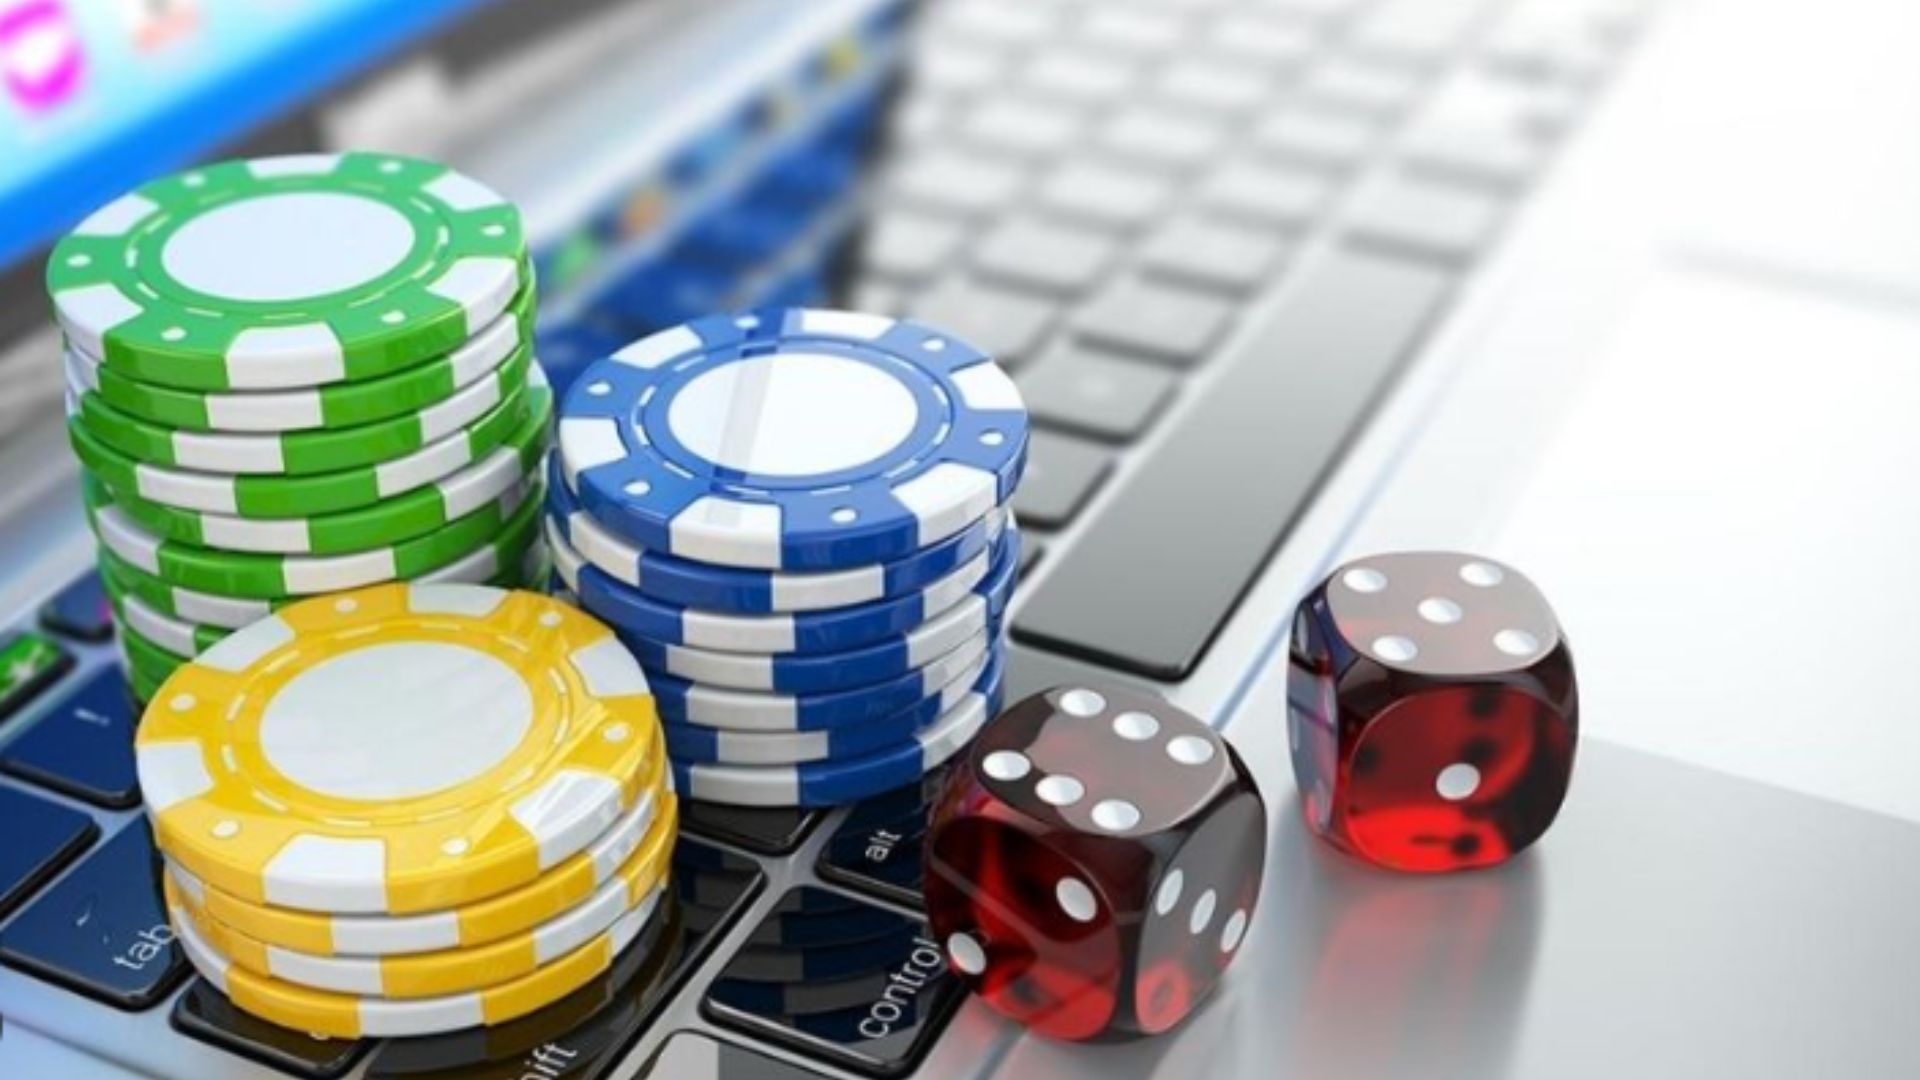 basics of playing at online casinos